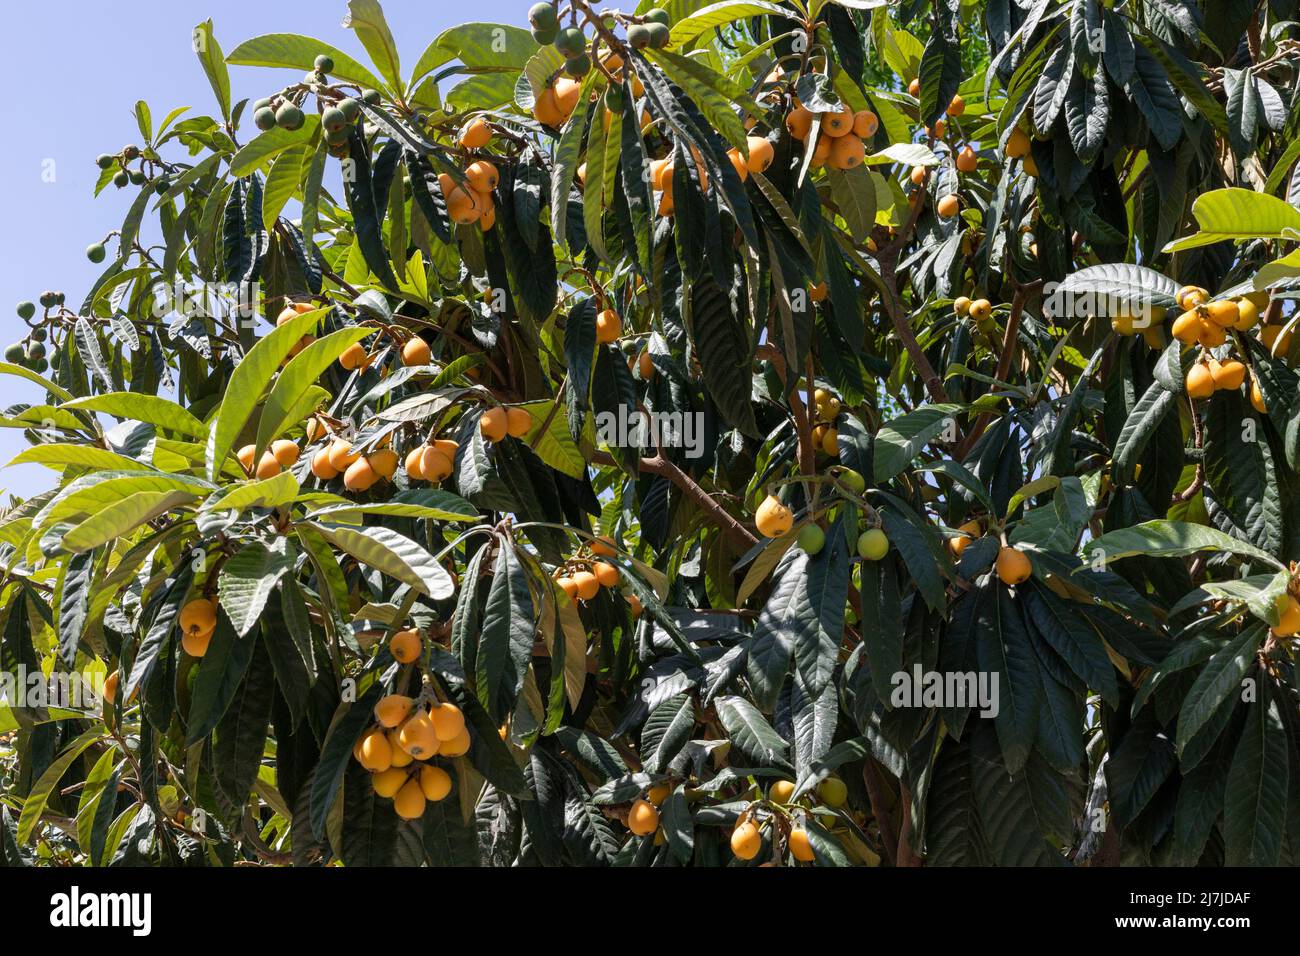 Organic fruit of loquat in a tree Stock Photo